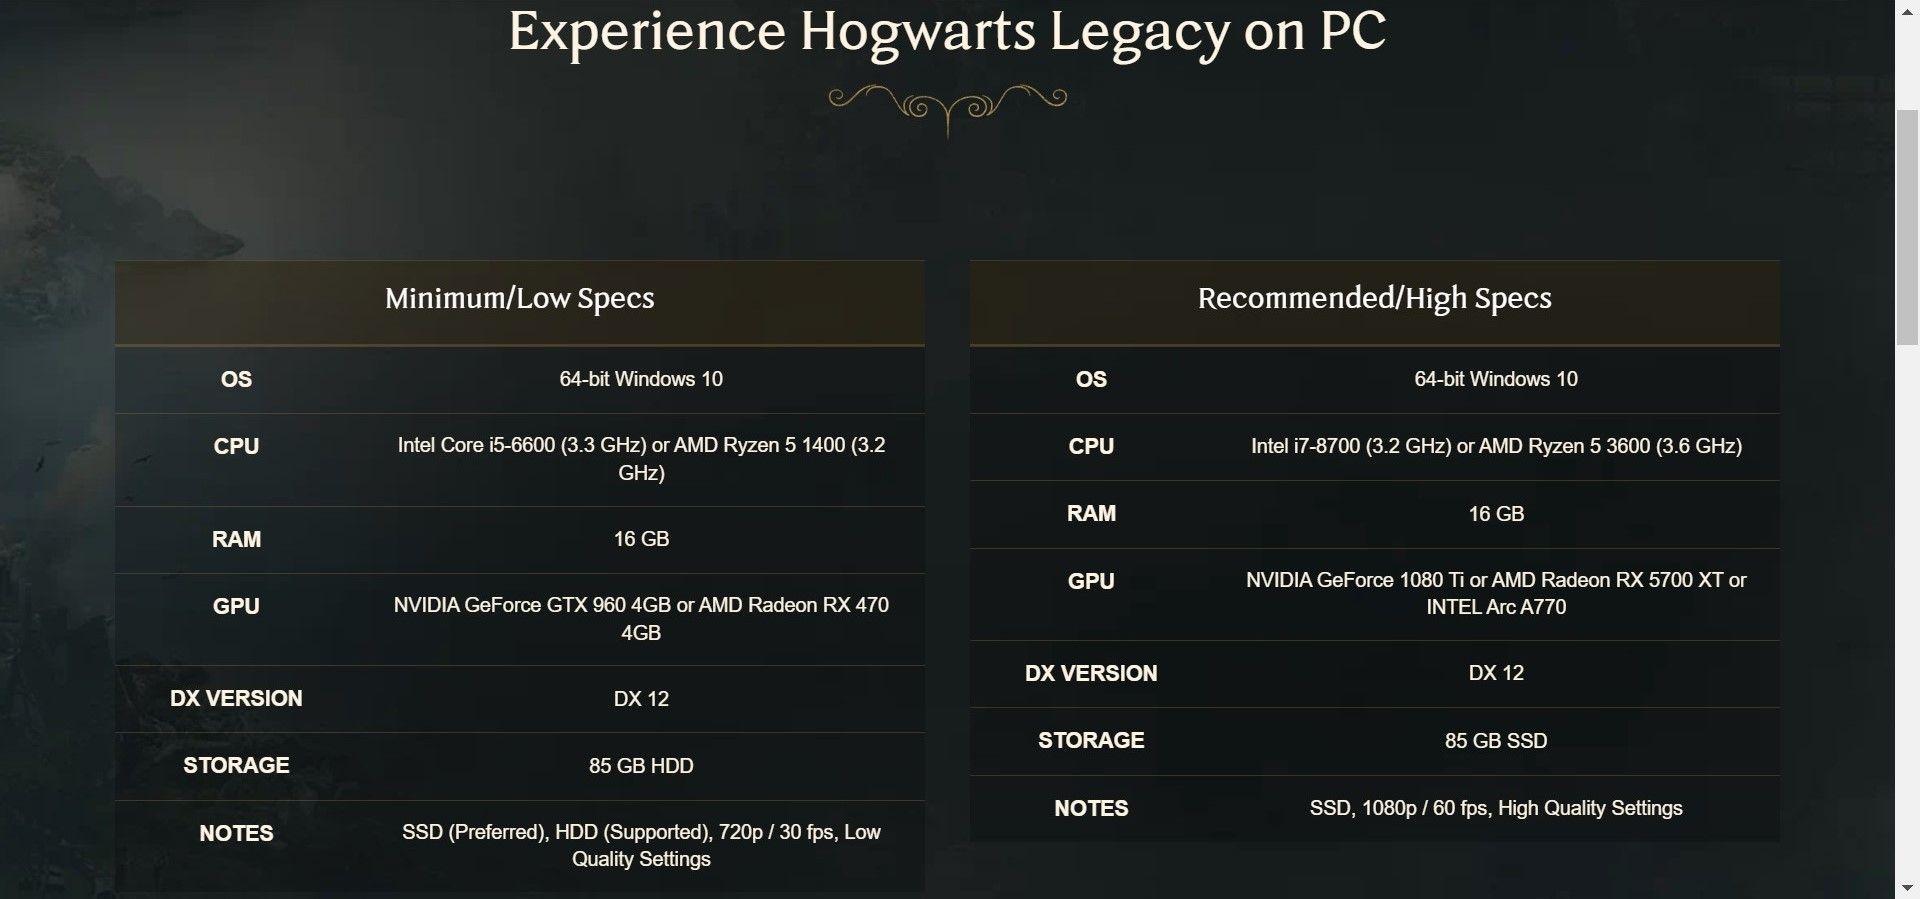 Check the Hogwarts Legacy System Requirements on Warner Bros Website